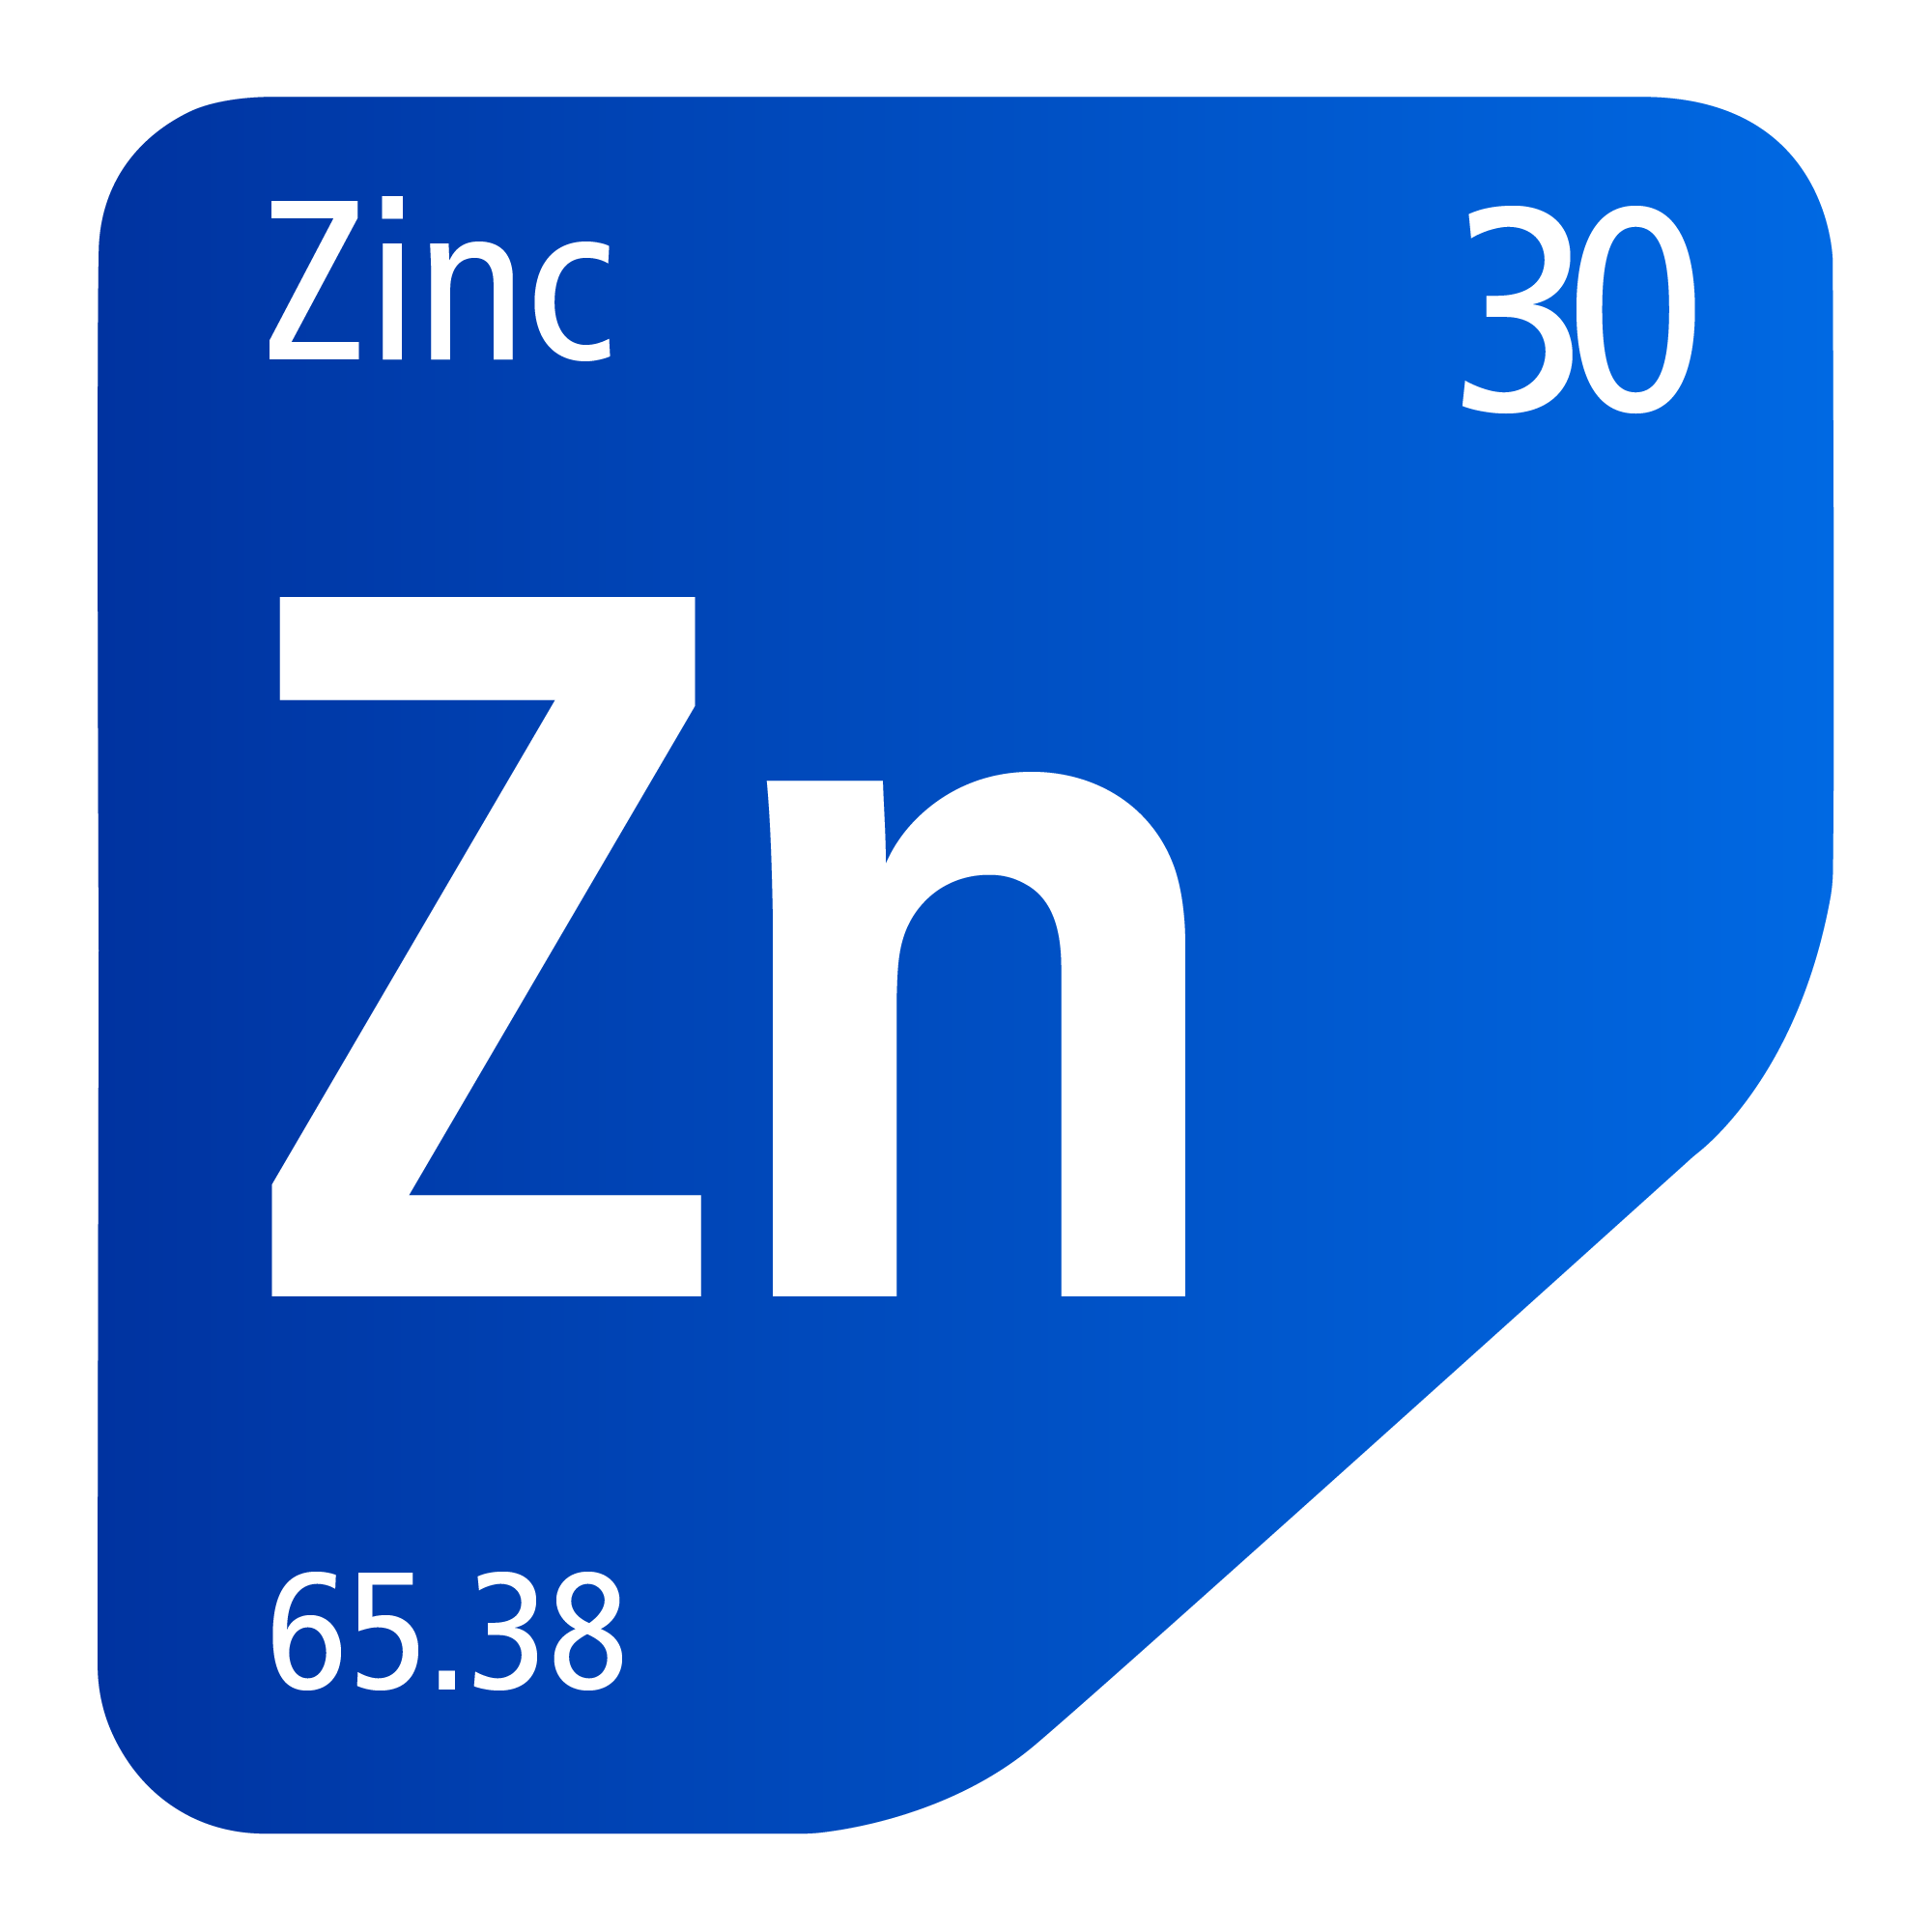 List of Behansar products in Zinc category